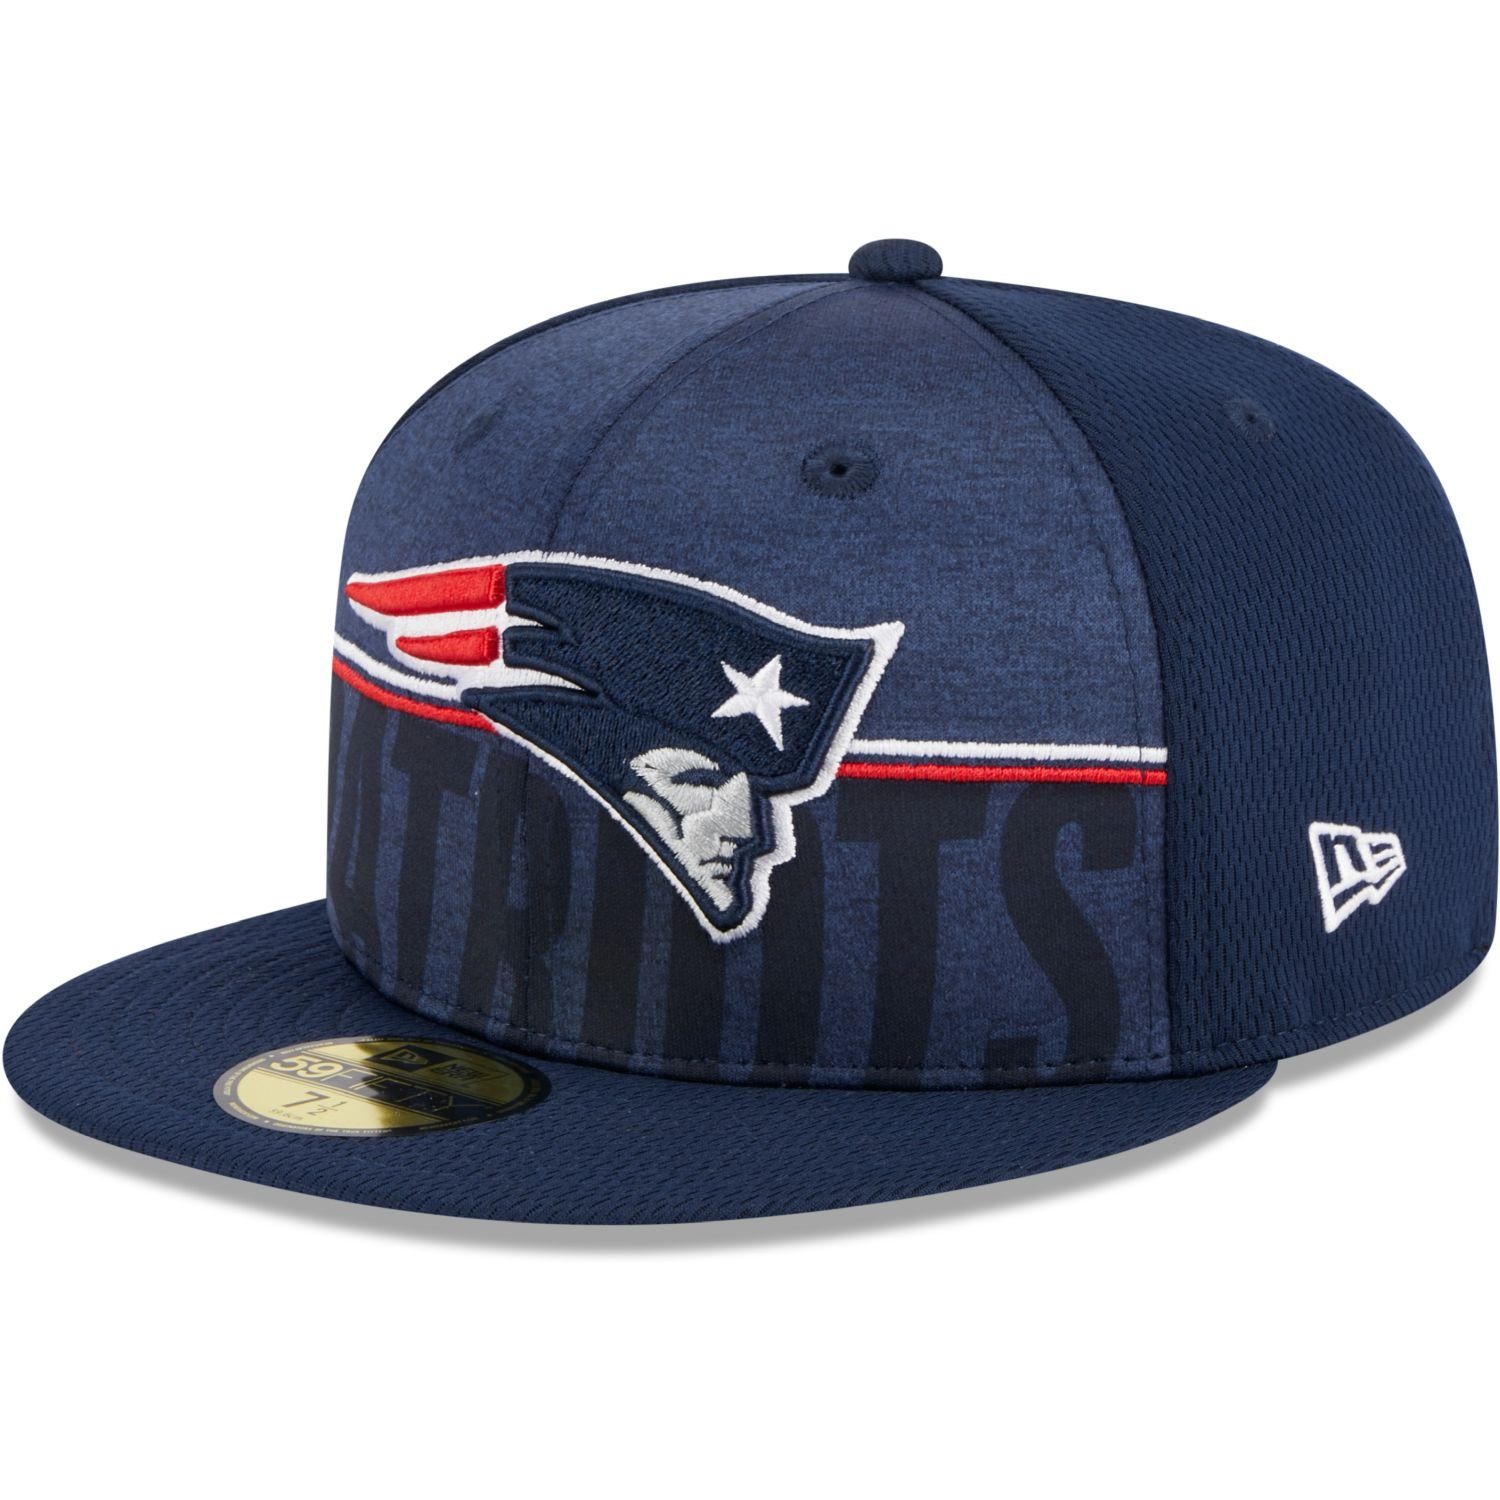 New Era Fitted Cap 59Fifty NFL TRAINING New England Patriots